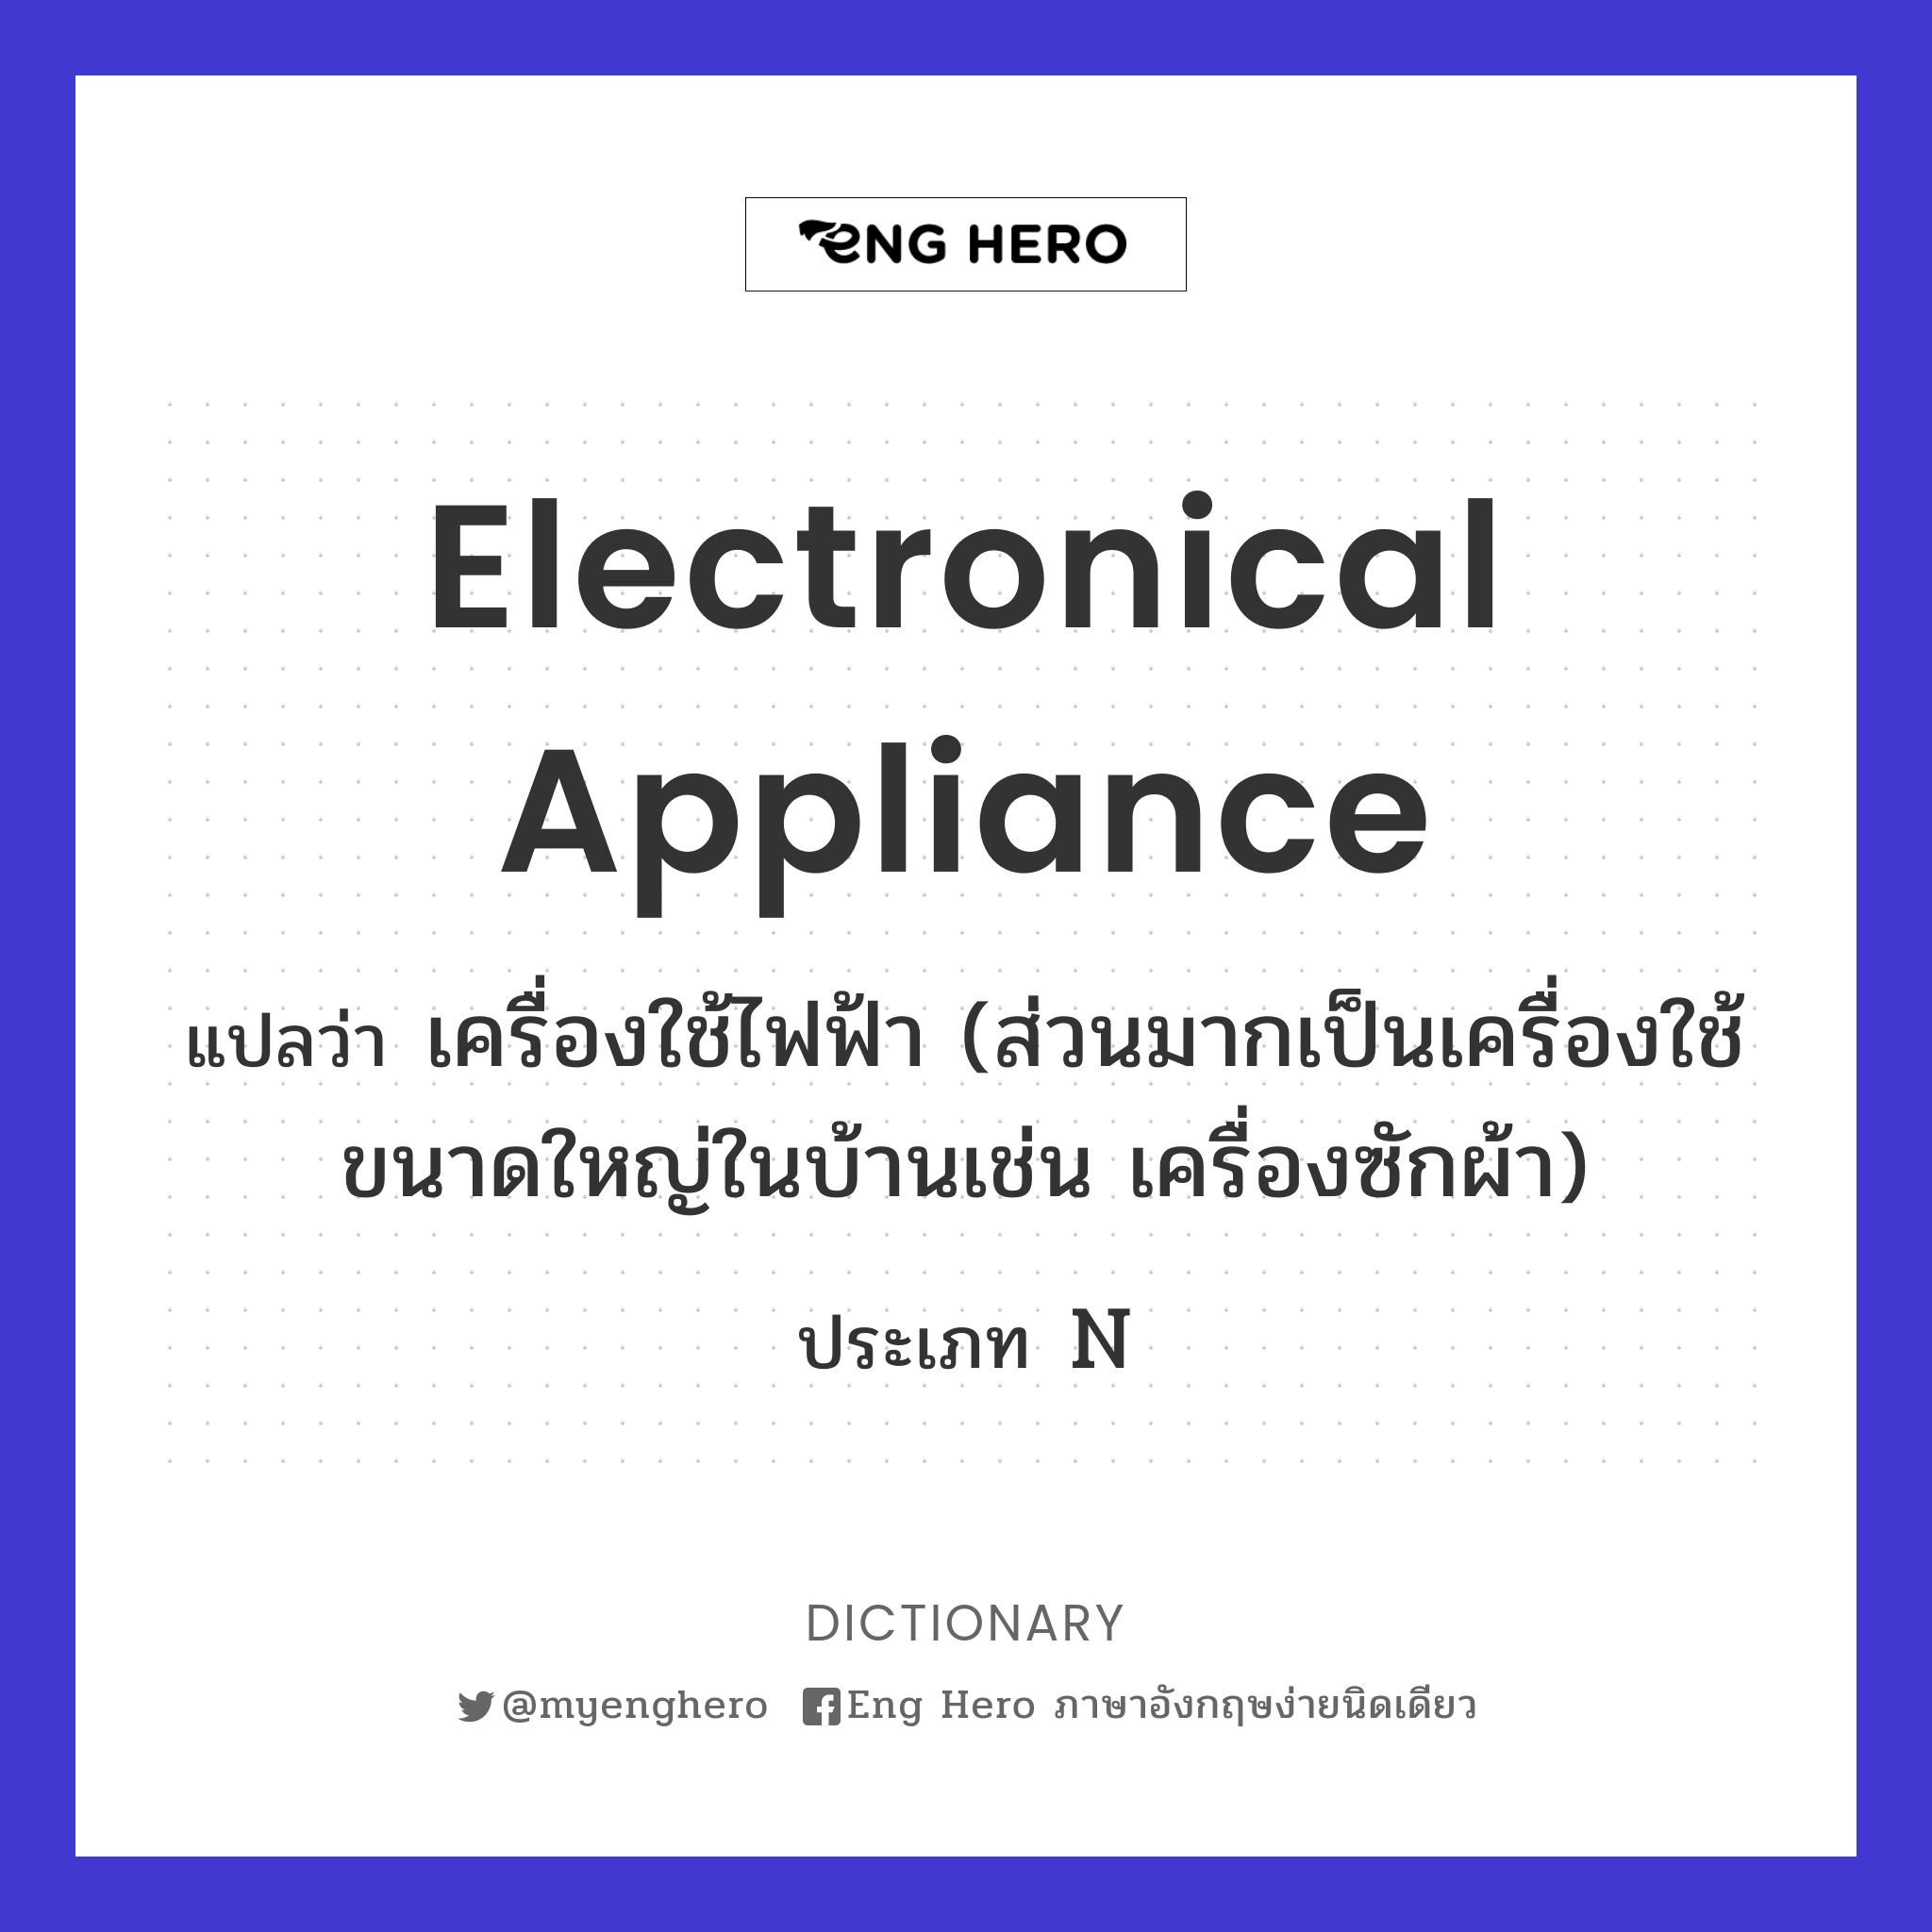 electronical appliance